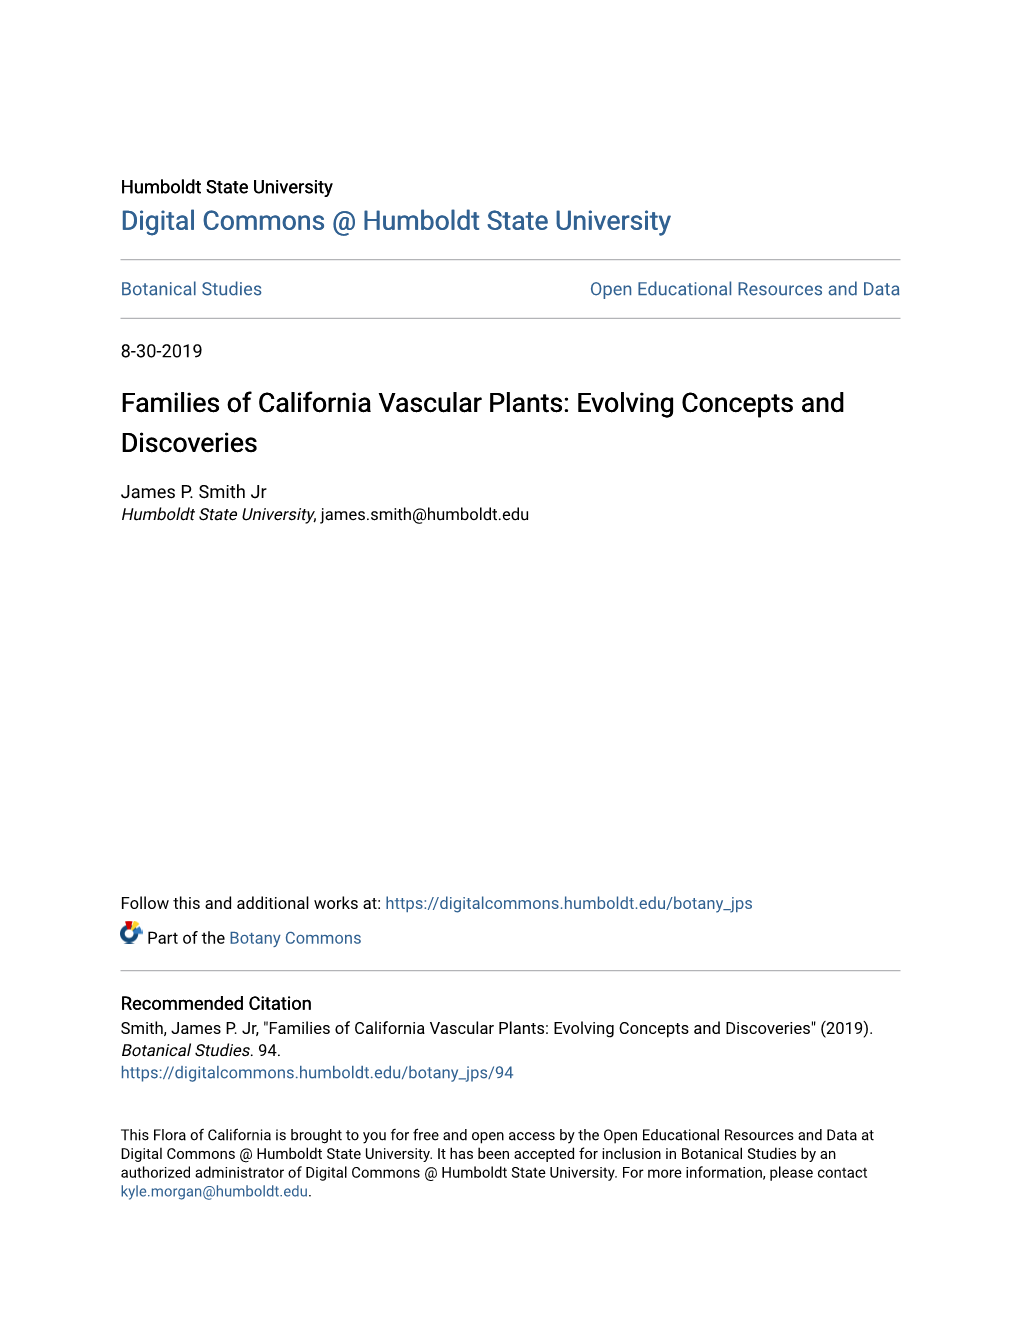 Families of California Vascular Plants: Evolving Concepts and Discoveries